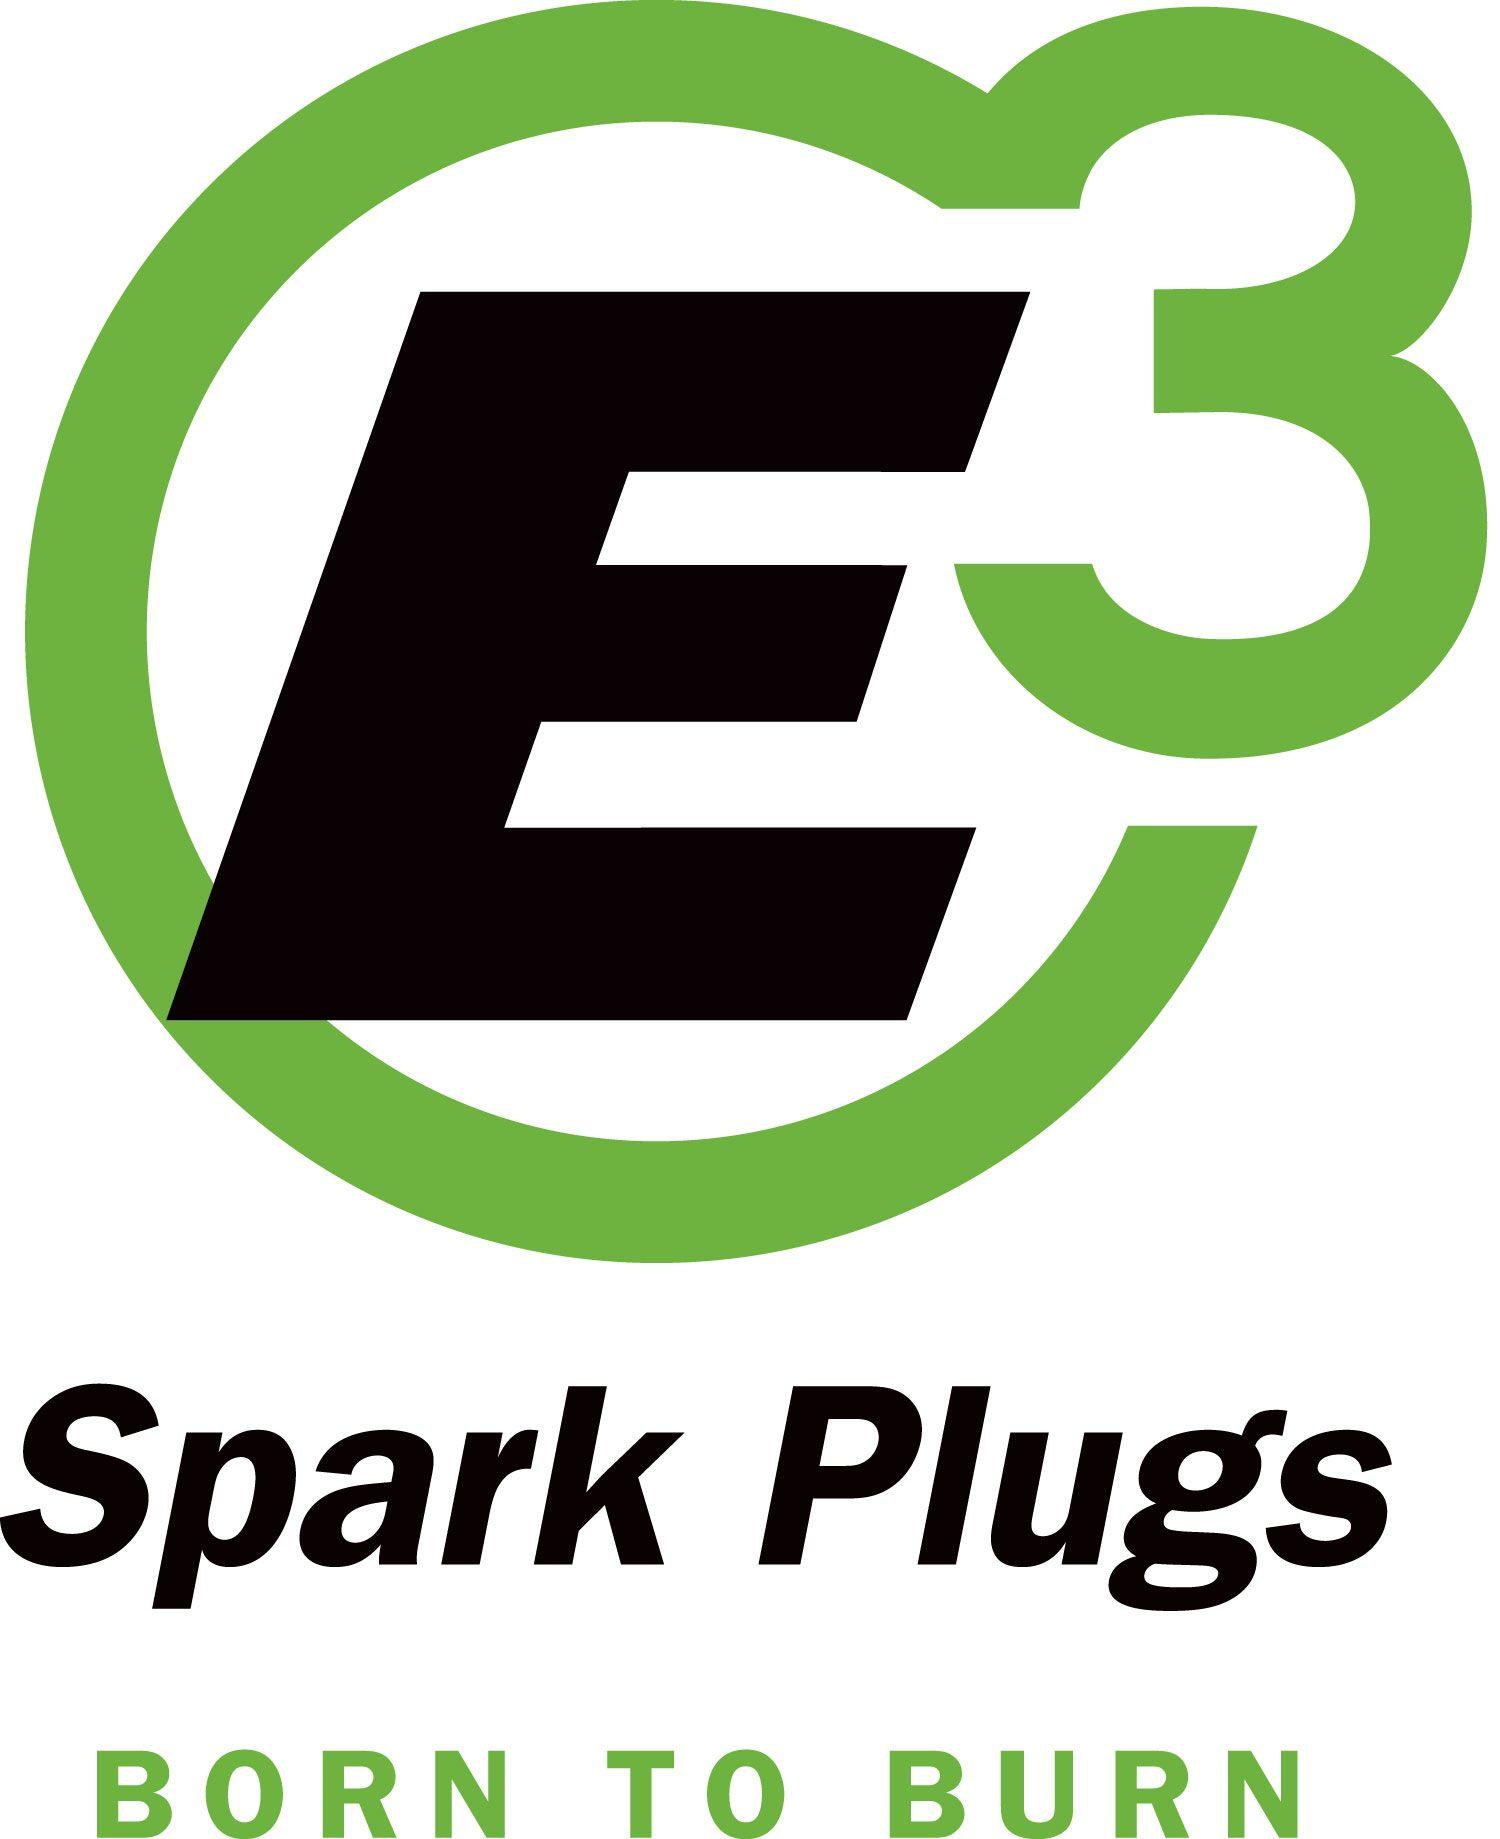 E3 Spark Plugs Logo - E3 Spark Plugs Partners With Midwest Truck Series In 2017 | Midwest ...